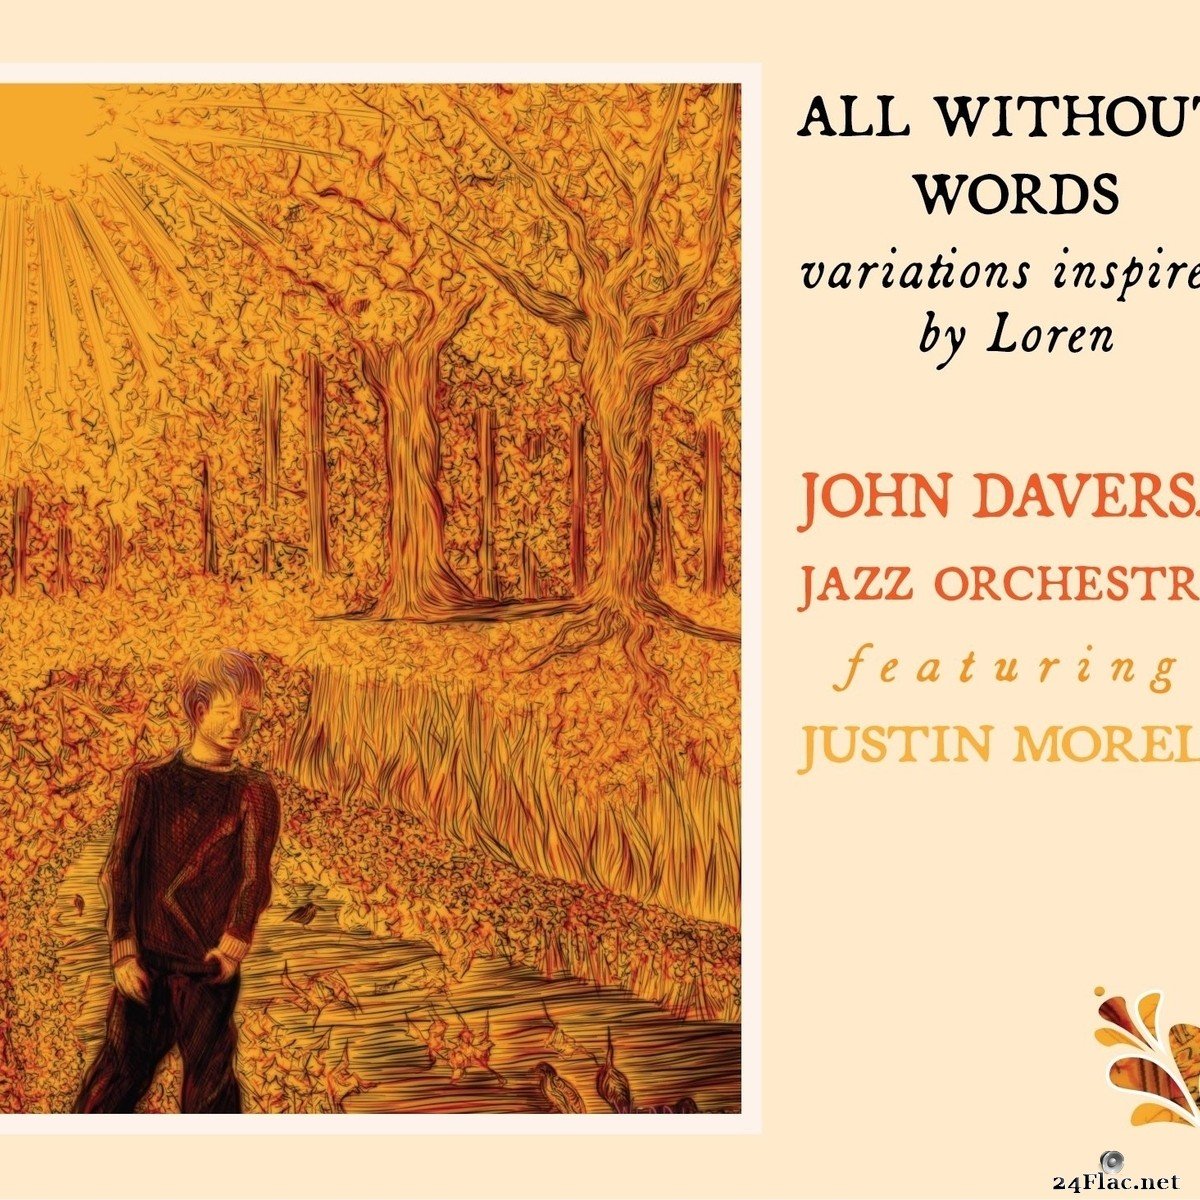 John Daversa - All Without Words: Variations Inspired by Loren (2021) FLAC